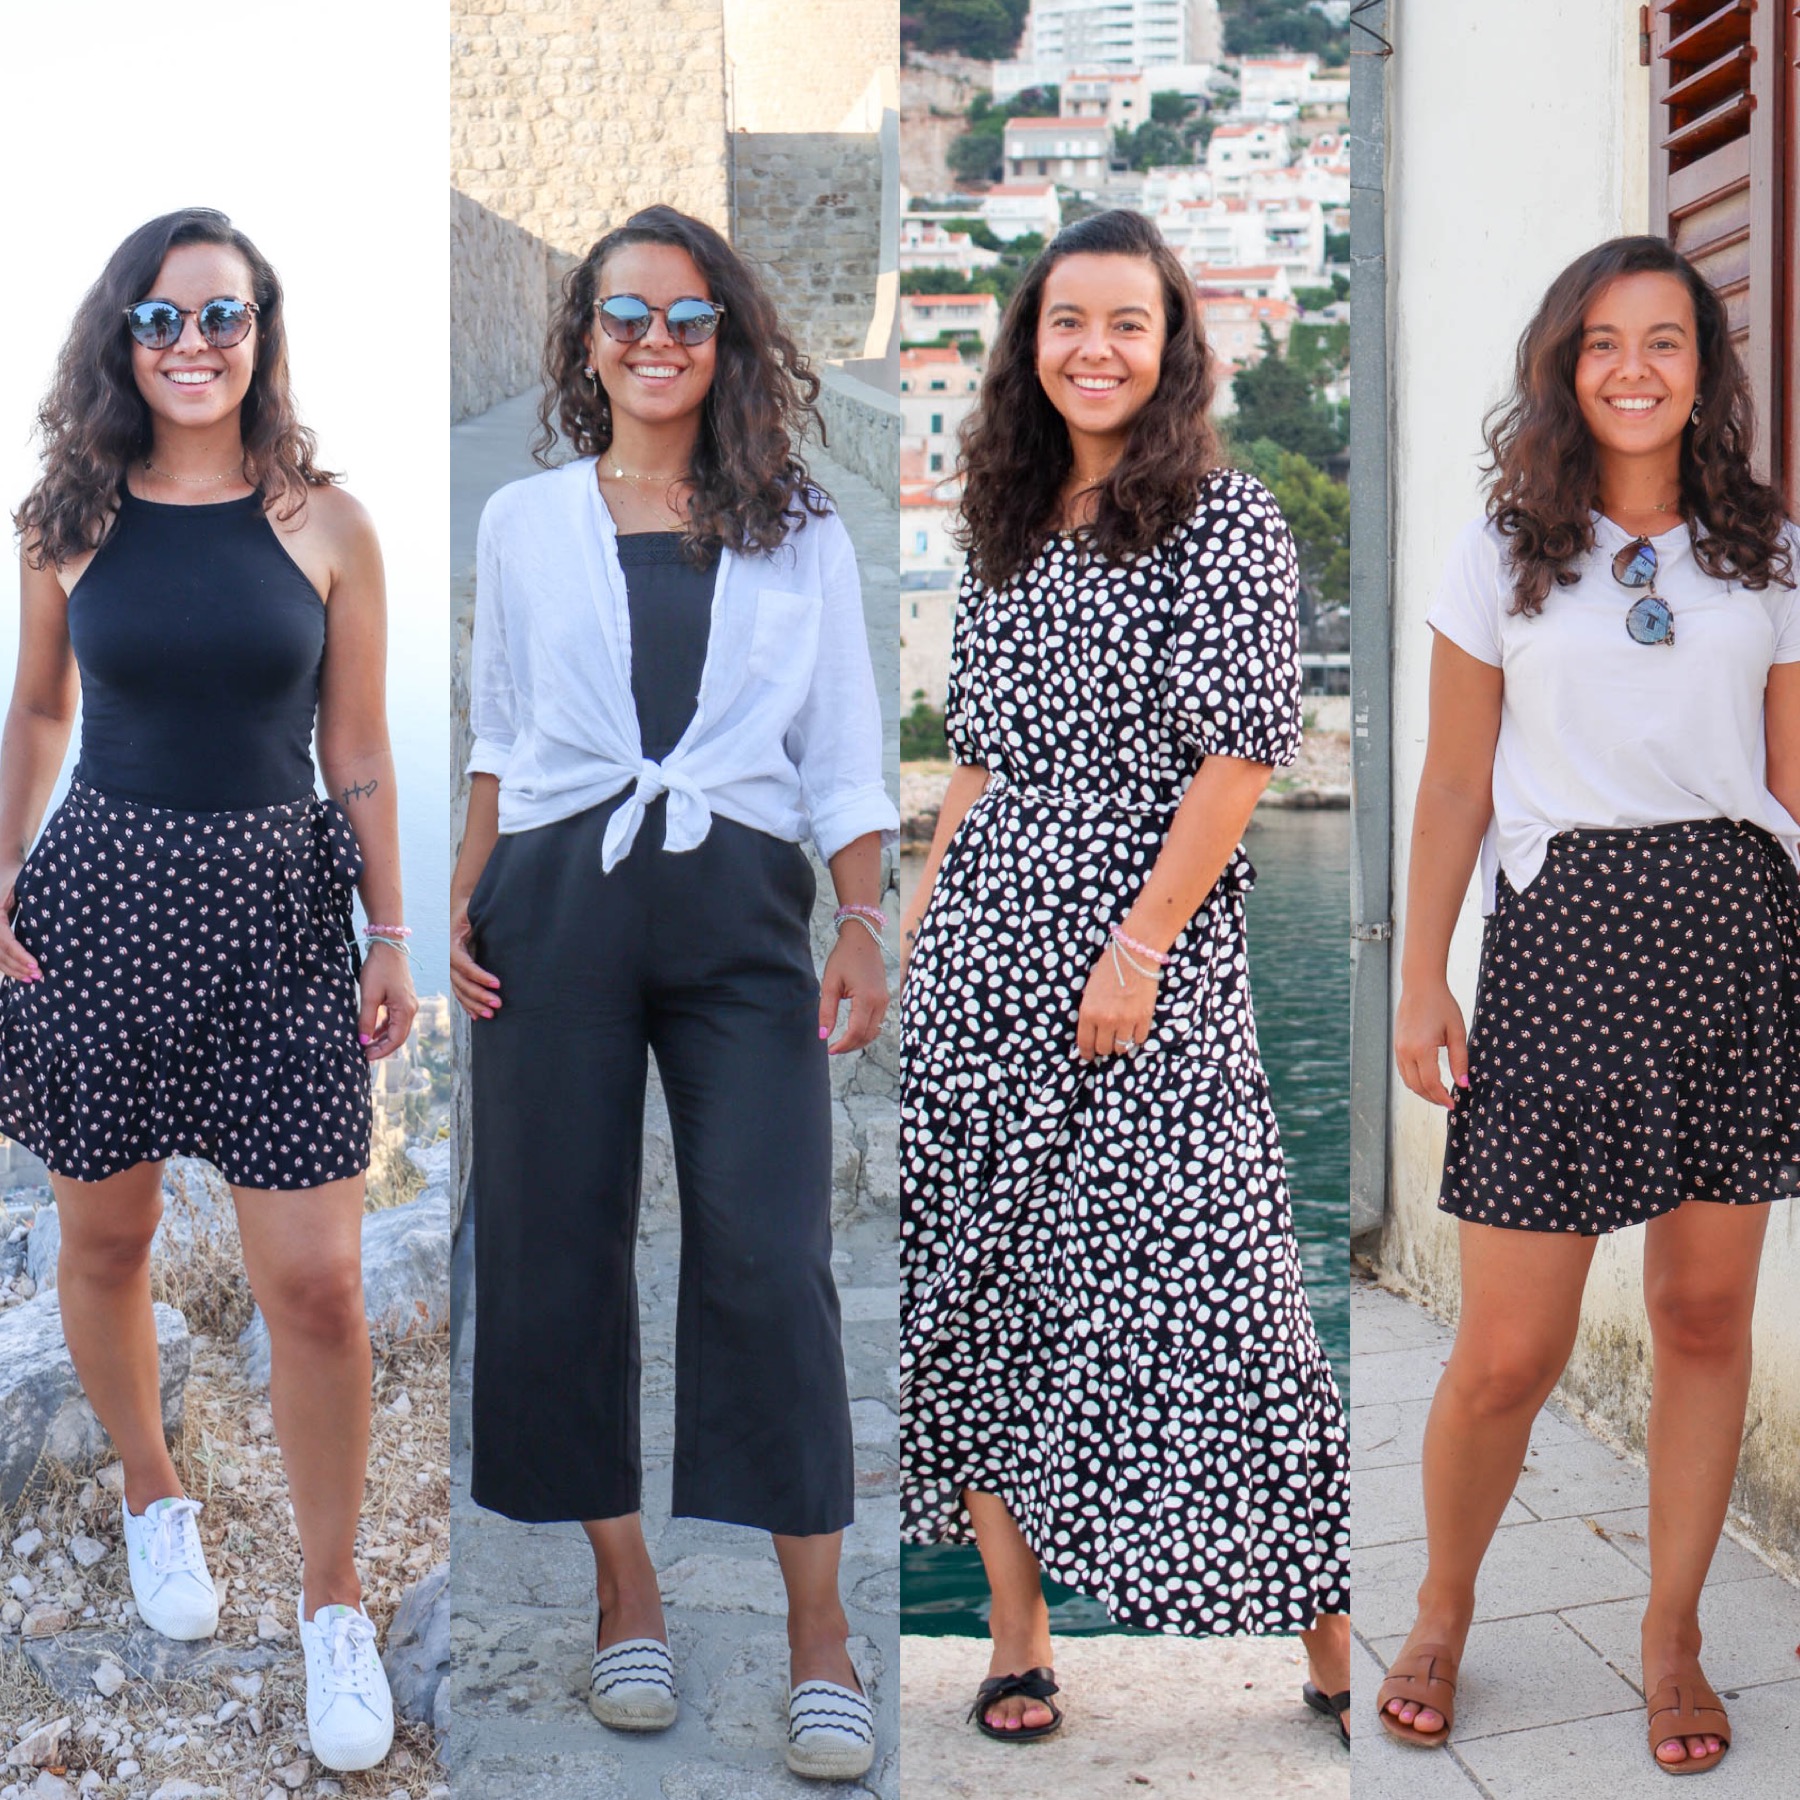 30 Piece Capsule Wardrobe For Travel + 25 Looks | Ways Of Style